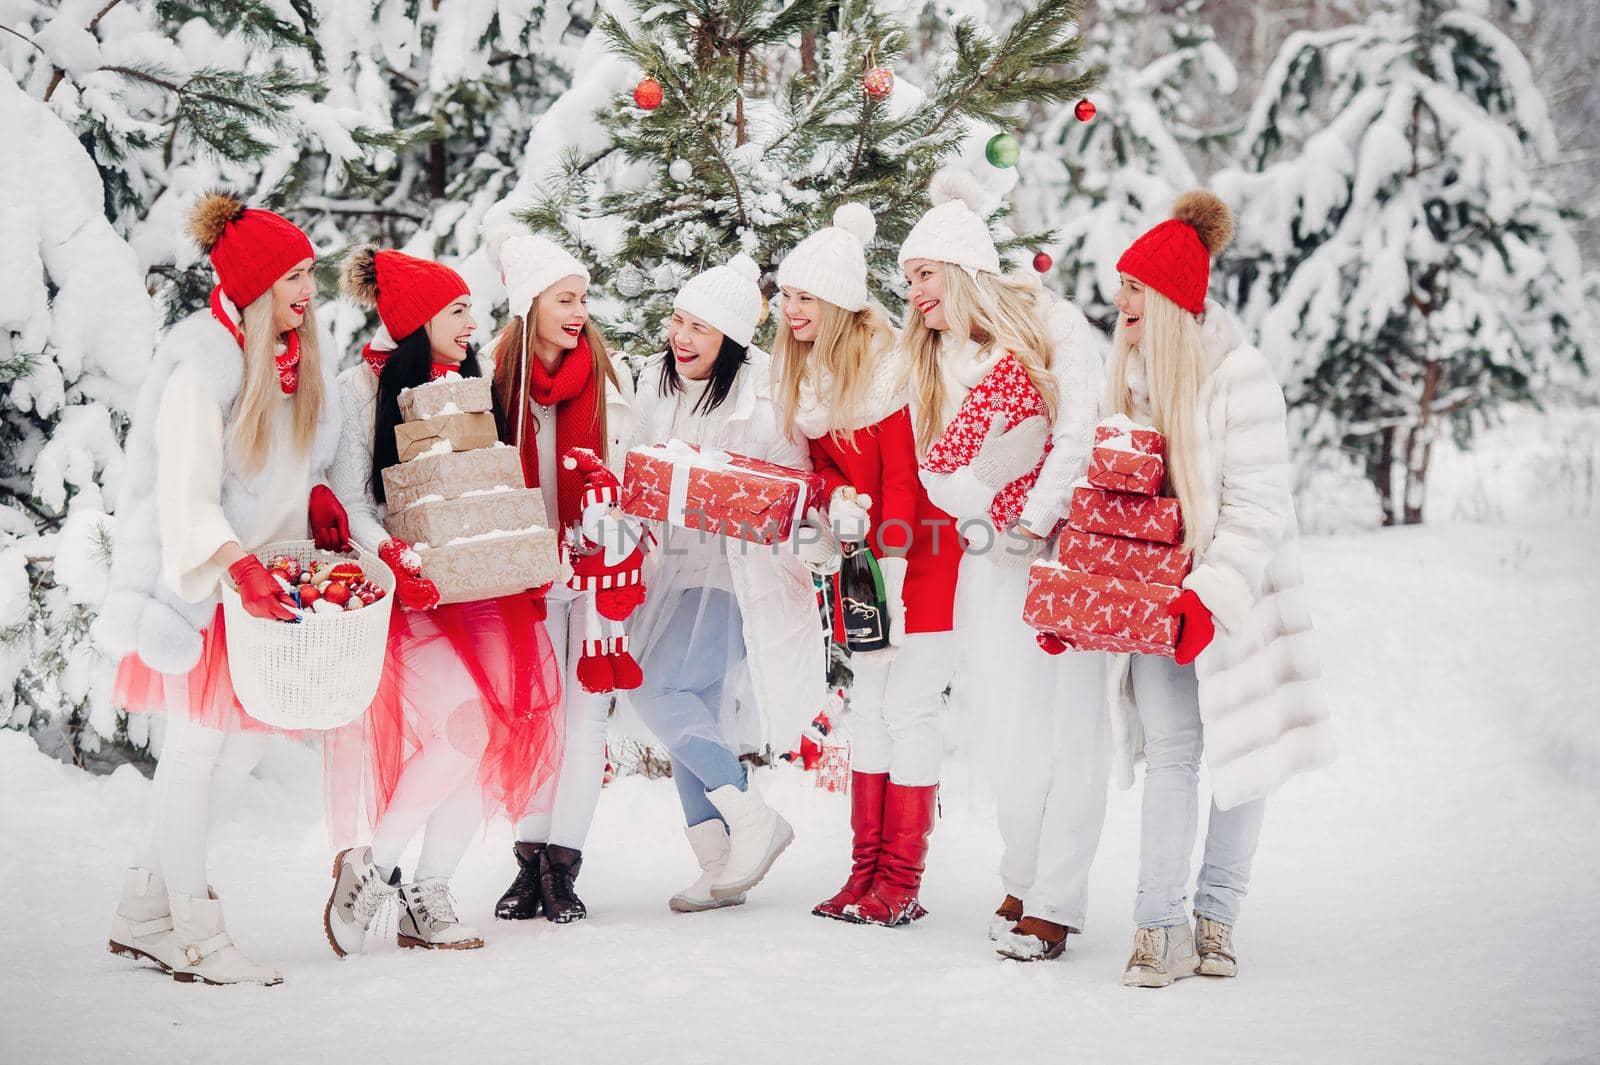 A large group of girls with Christmas gifts in their hands standing in the winter forest.Girls in red and white clothes with Christmas gifts in the snowy forest by Lobachad